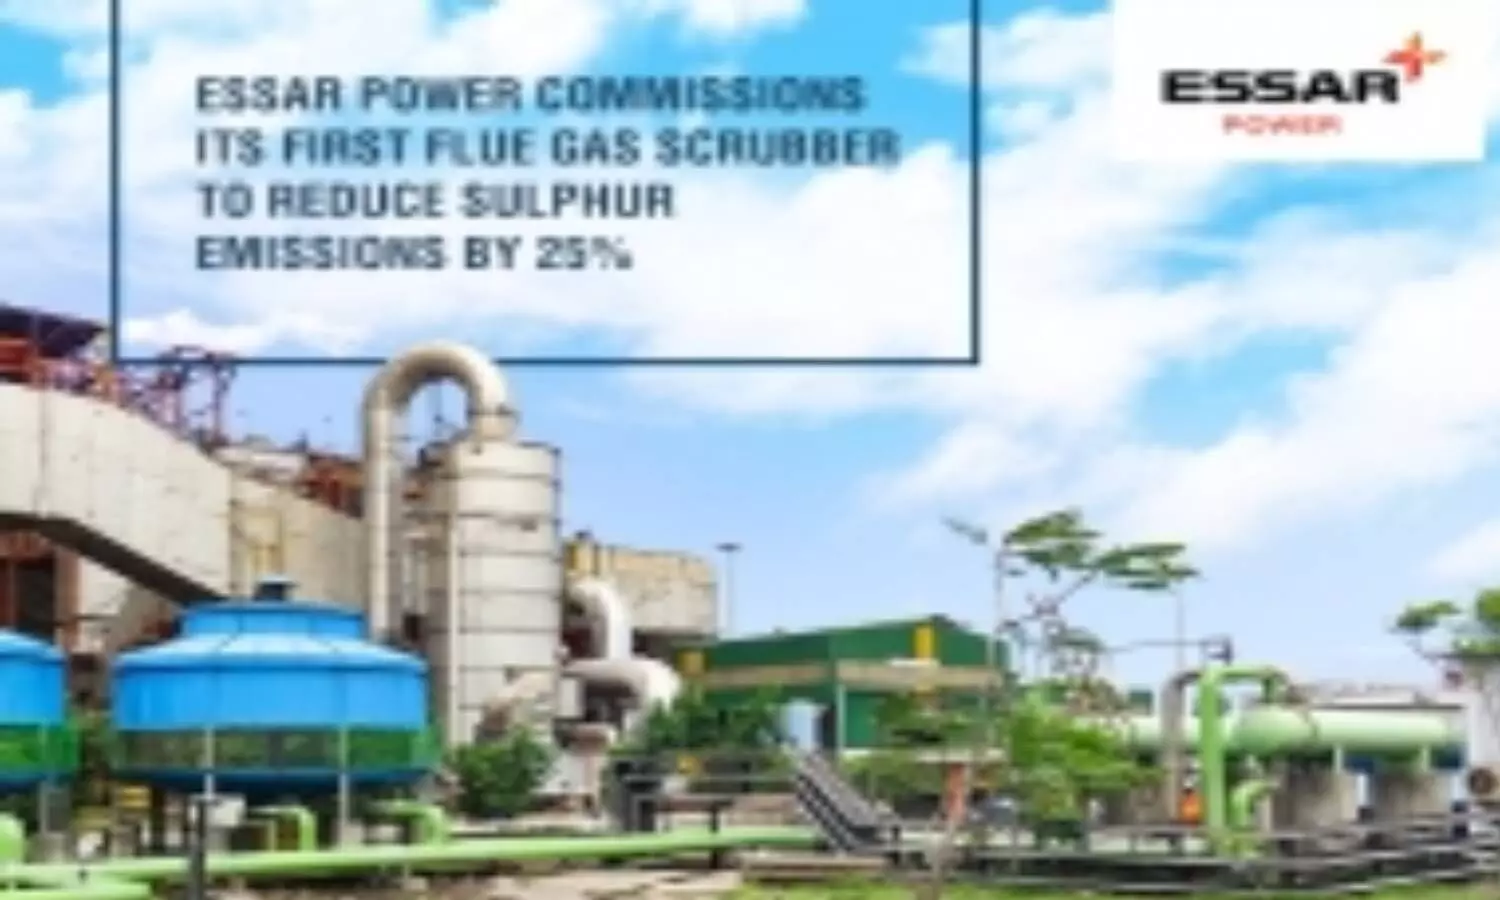 Essar Power commissions its 1st flue gas scrubber to reduce Sulphur emissions